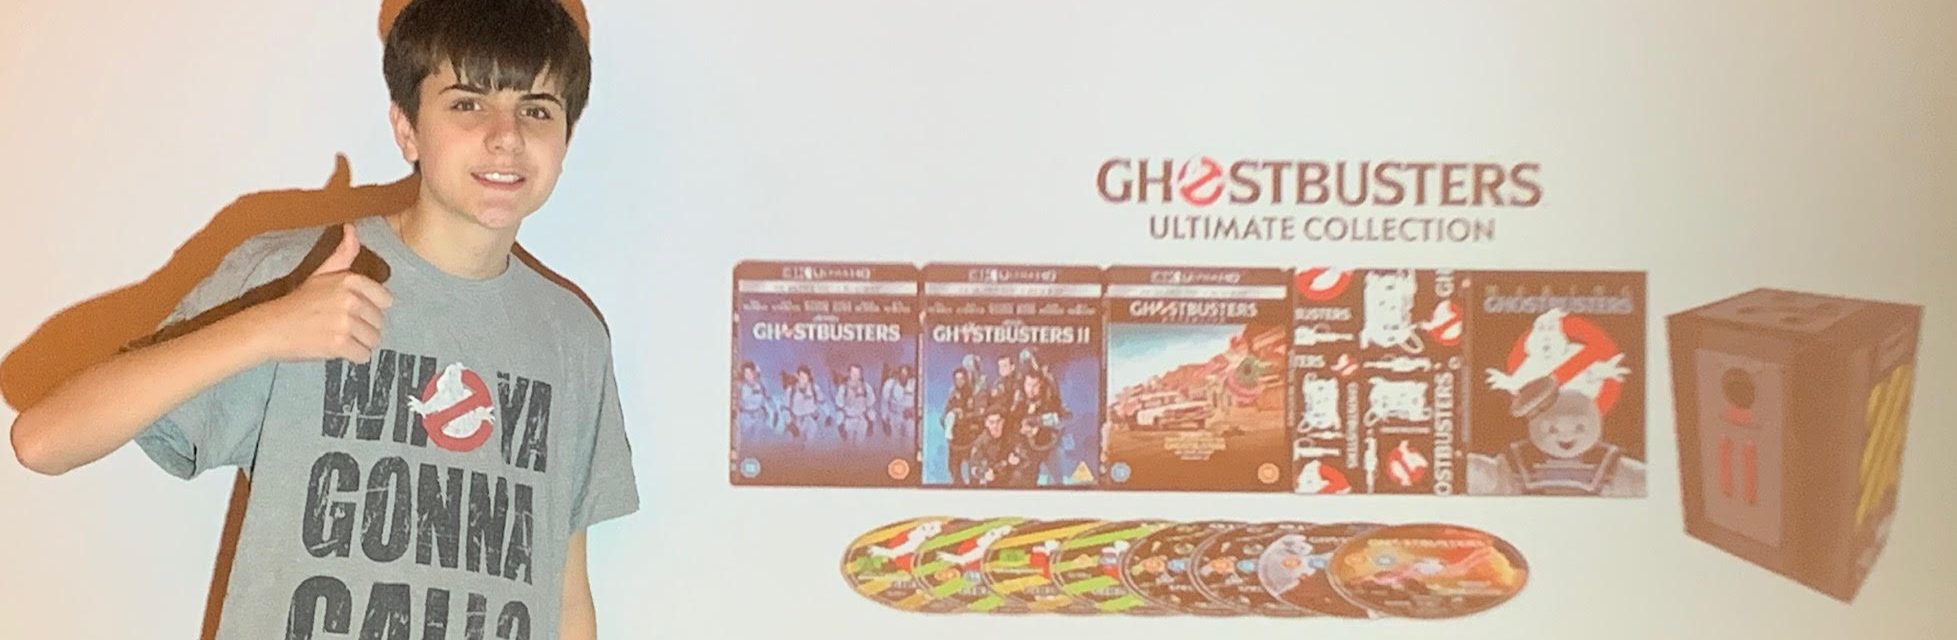 Ghostbusters Ultimate Collection 4K ULTRA HD Set 